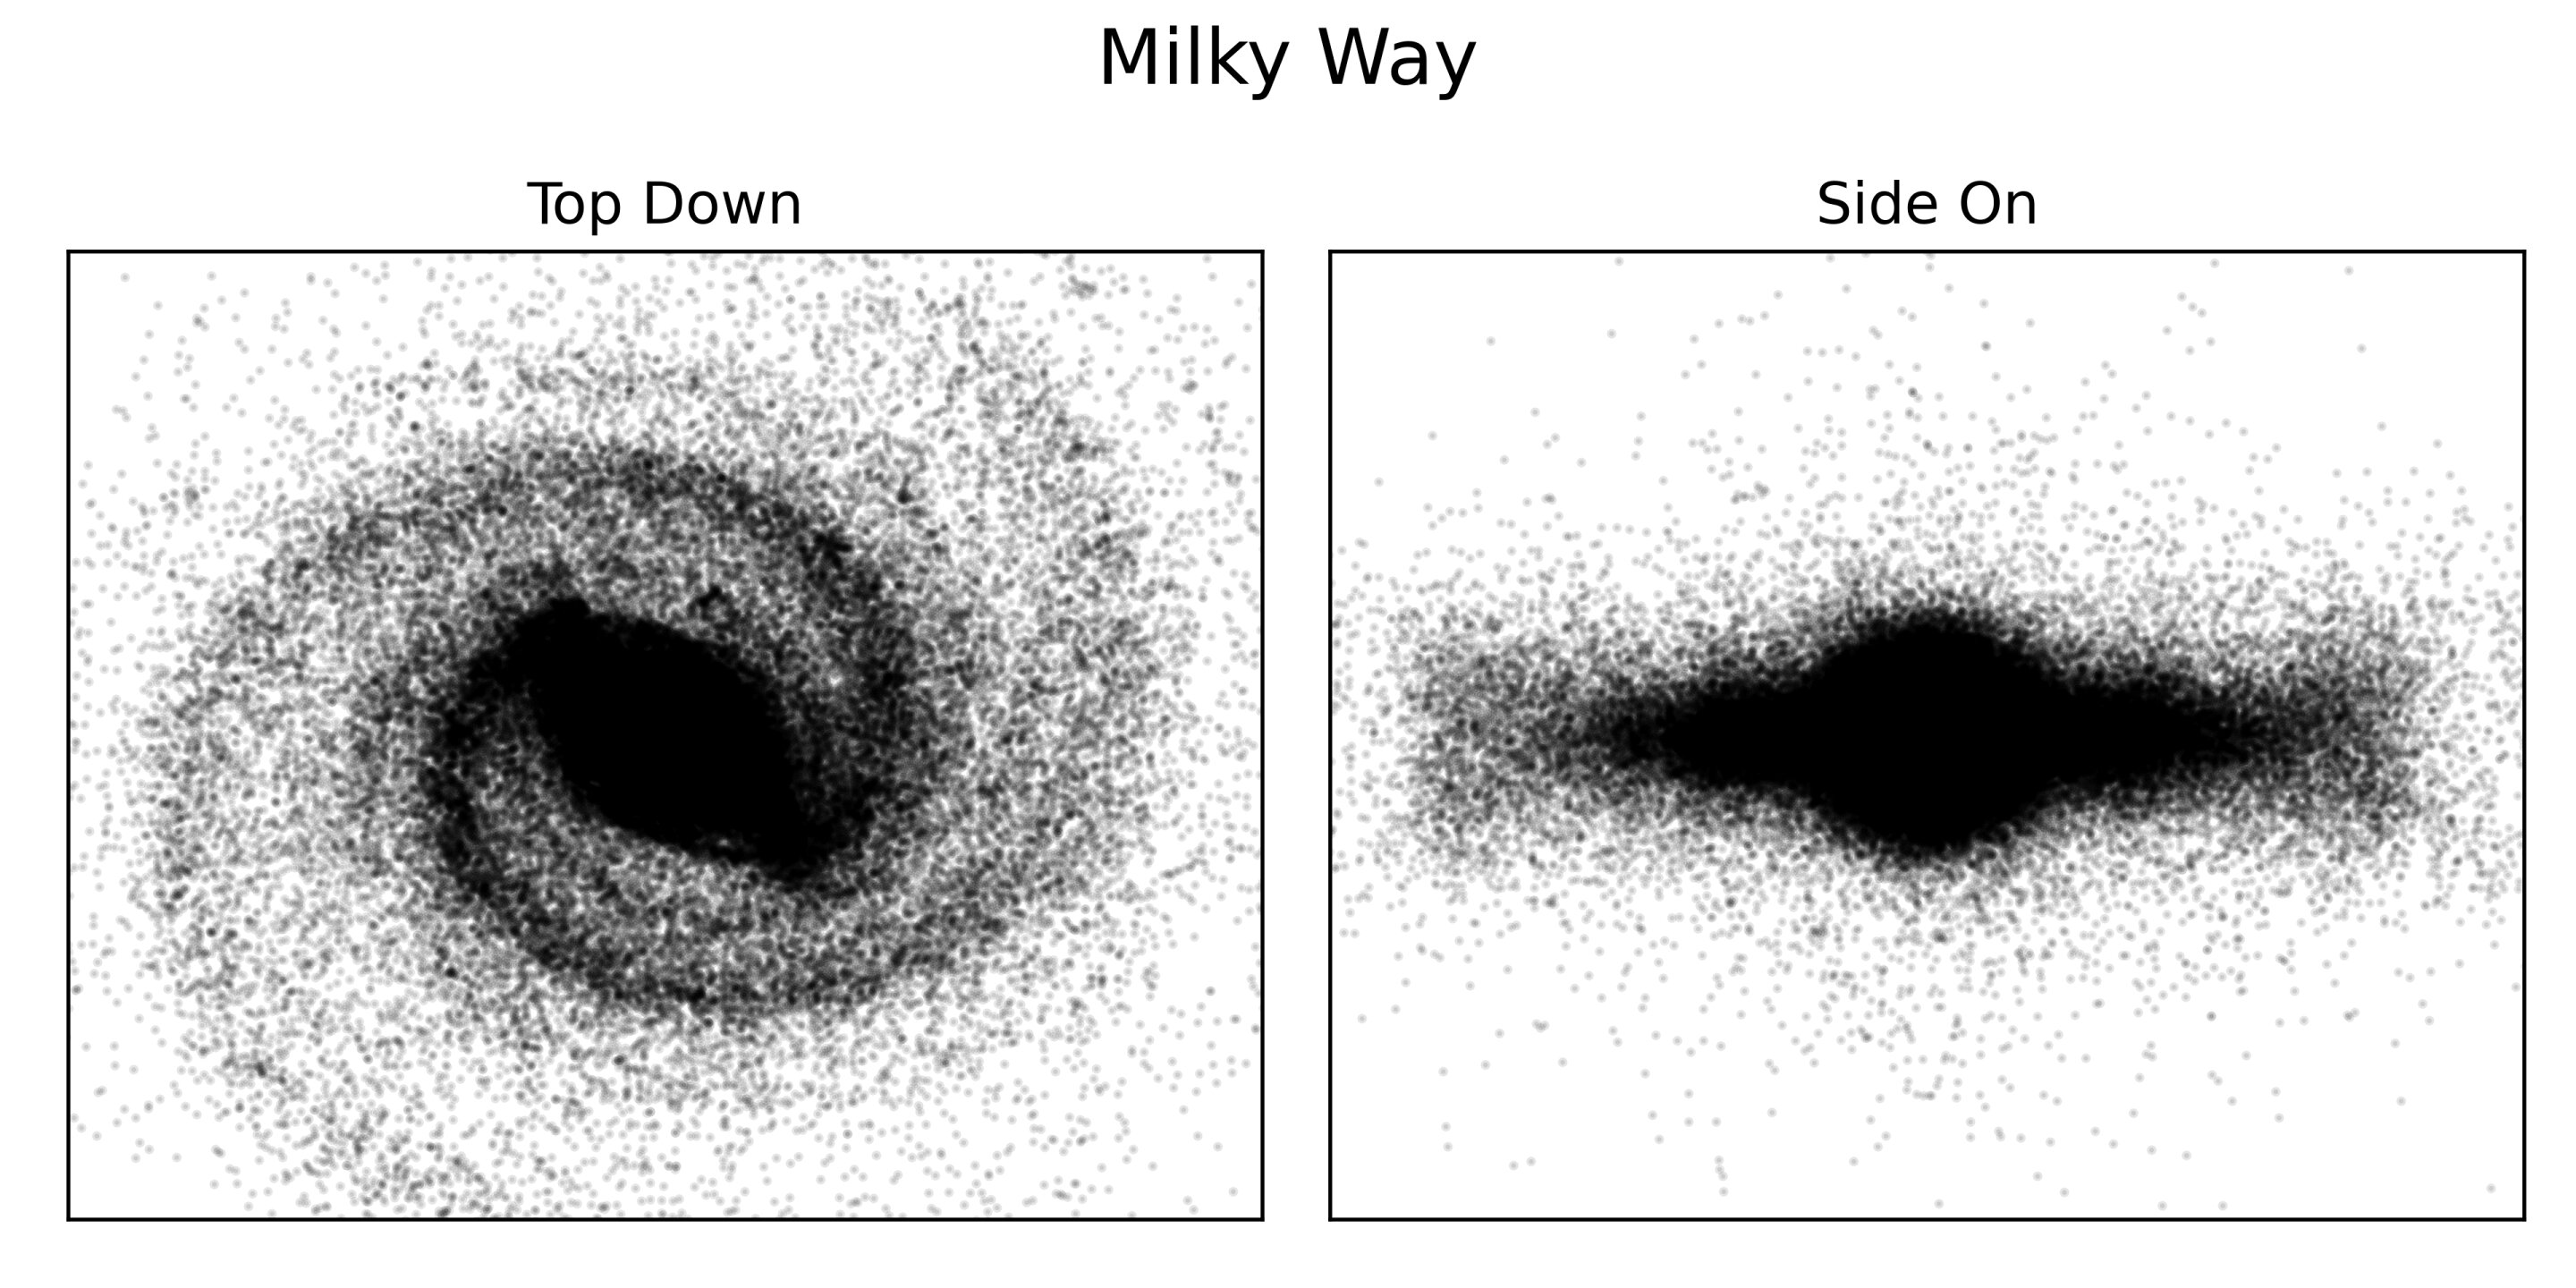 A map showing the distribution of stars in the visible Milky Way.  The spiral arms of the galaxy are clearly visible in the top-down image.